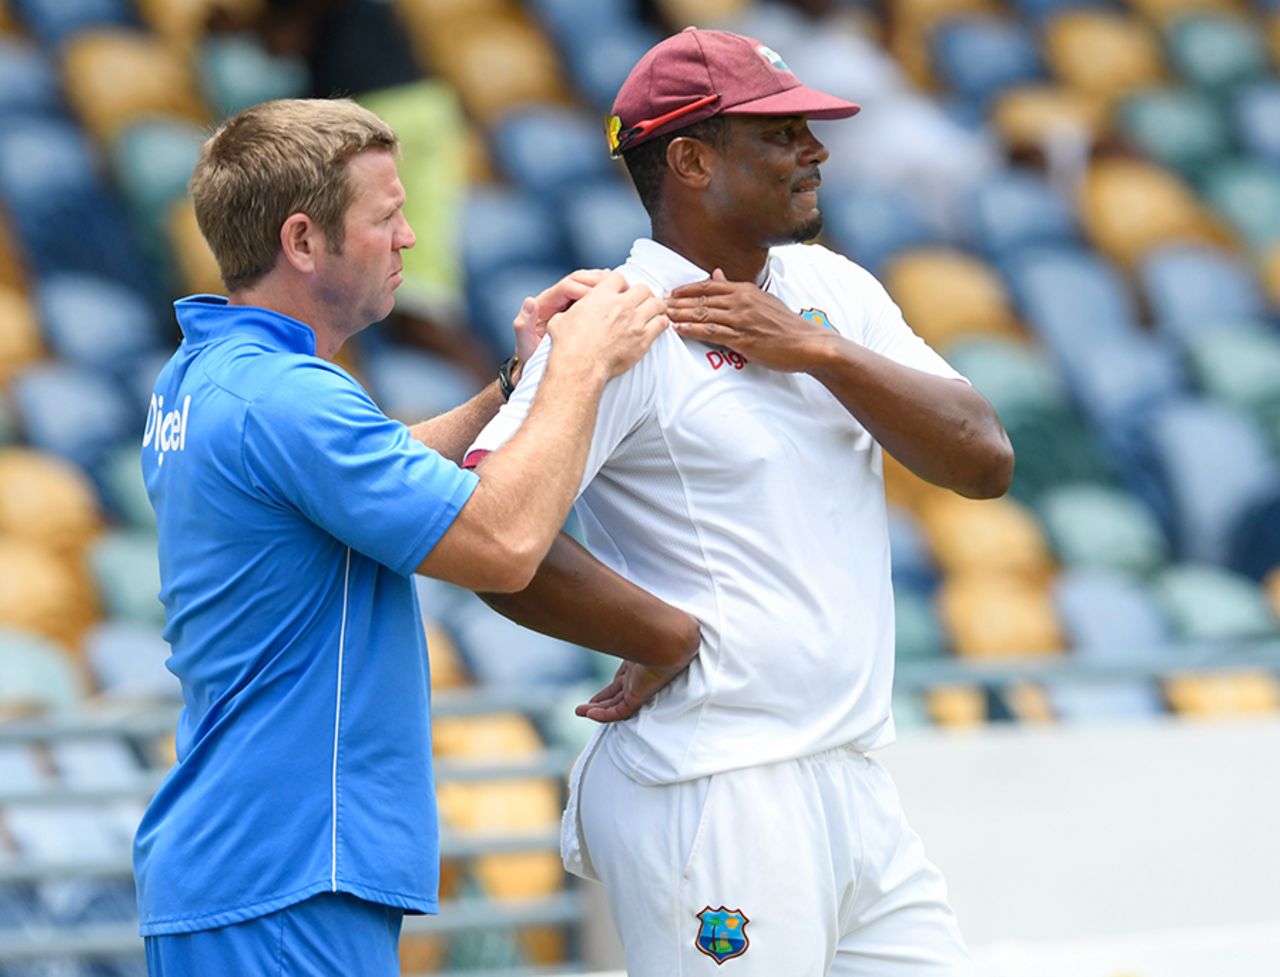 Shannon Gabriel gets some attention from the physio near the boundary, West Indies v Pakistan, 2nd Test, Bridgetown,2nd day, May 1, 2017